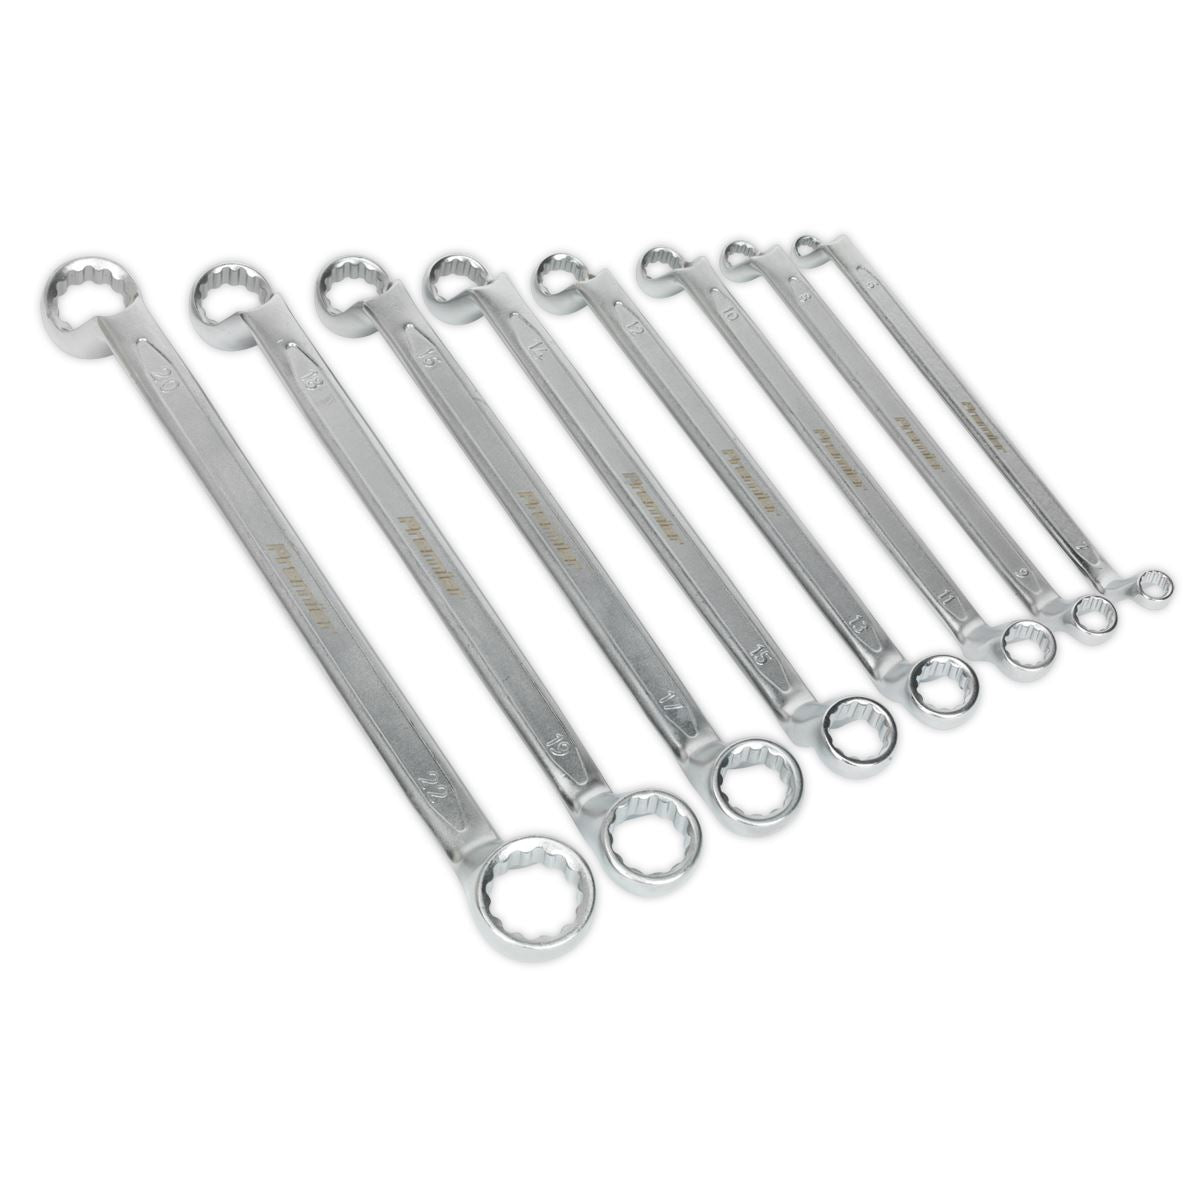 Sealey Premier 8 Piece Offset Double End Ring Spanner Set Deep WallDrive Rings